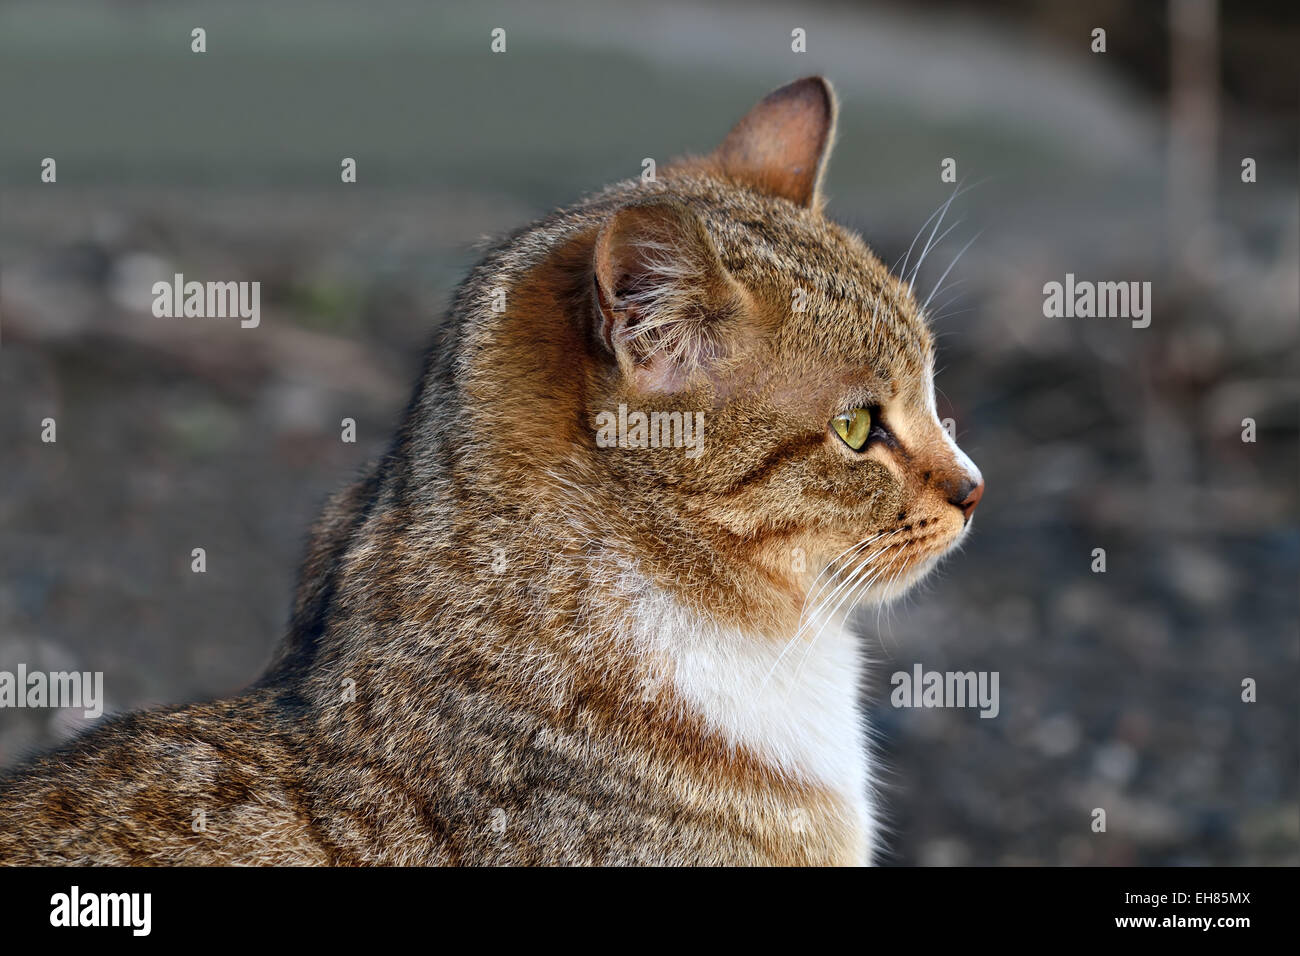 Wild cat is getting ready to jump Stock Photo